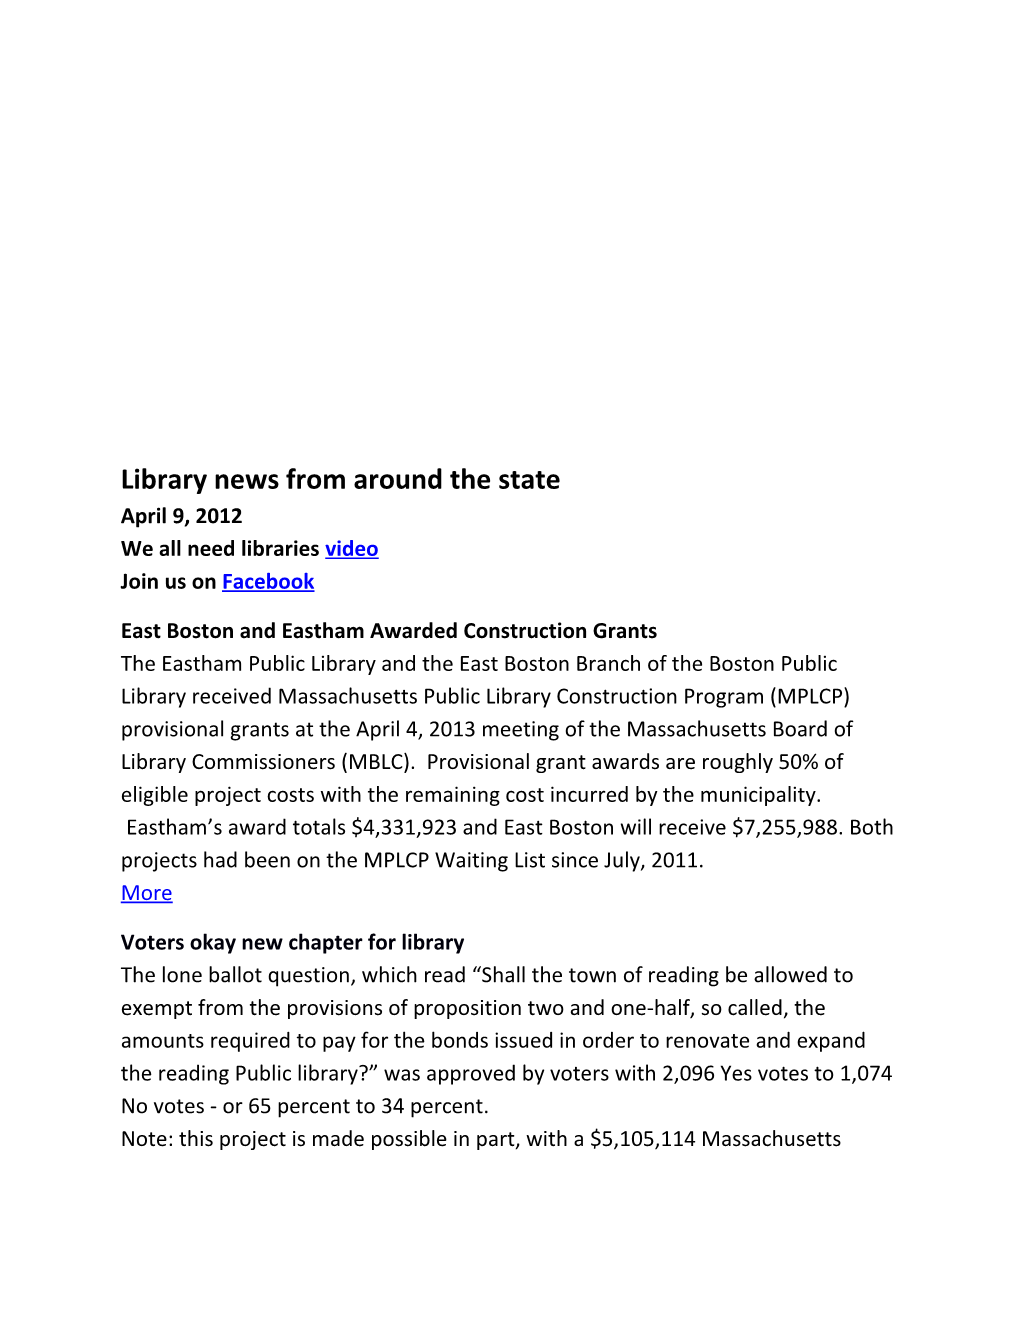 Library News from Around the State April 9, 2012 We All Need Libraries Video Join Us On